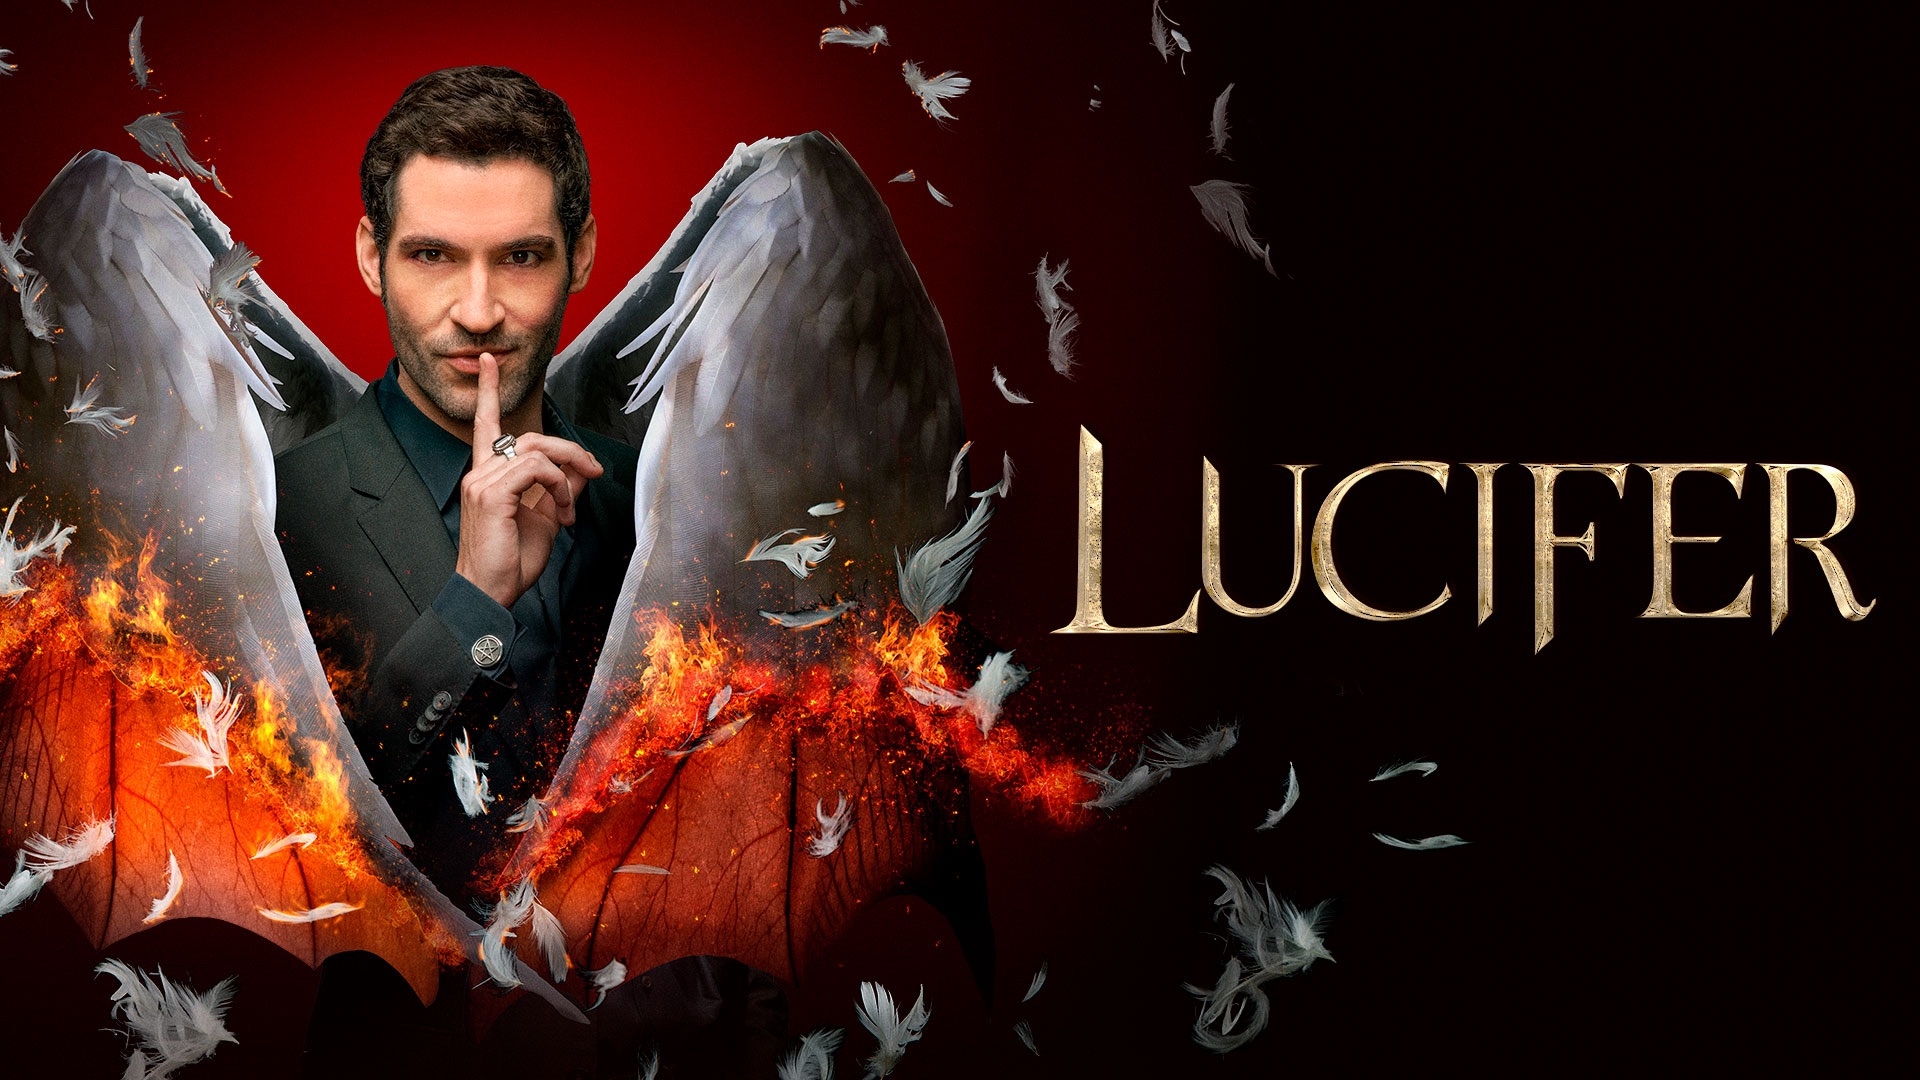 Tom Ellis New Lucifer Morningstar Wallpaper, HD TV Series 4K Wallpapers,  Images, Photos and Background - Wallpapers Den